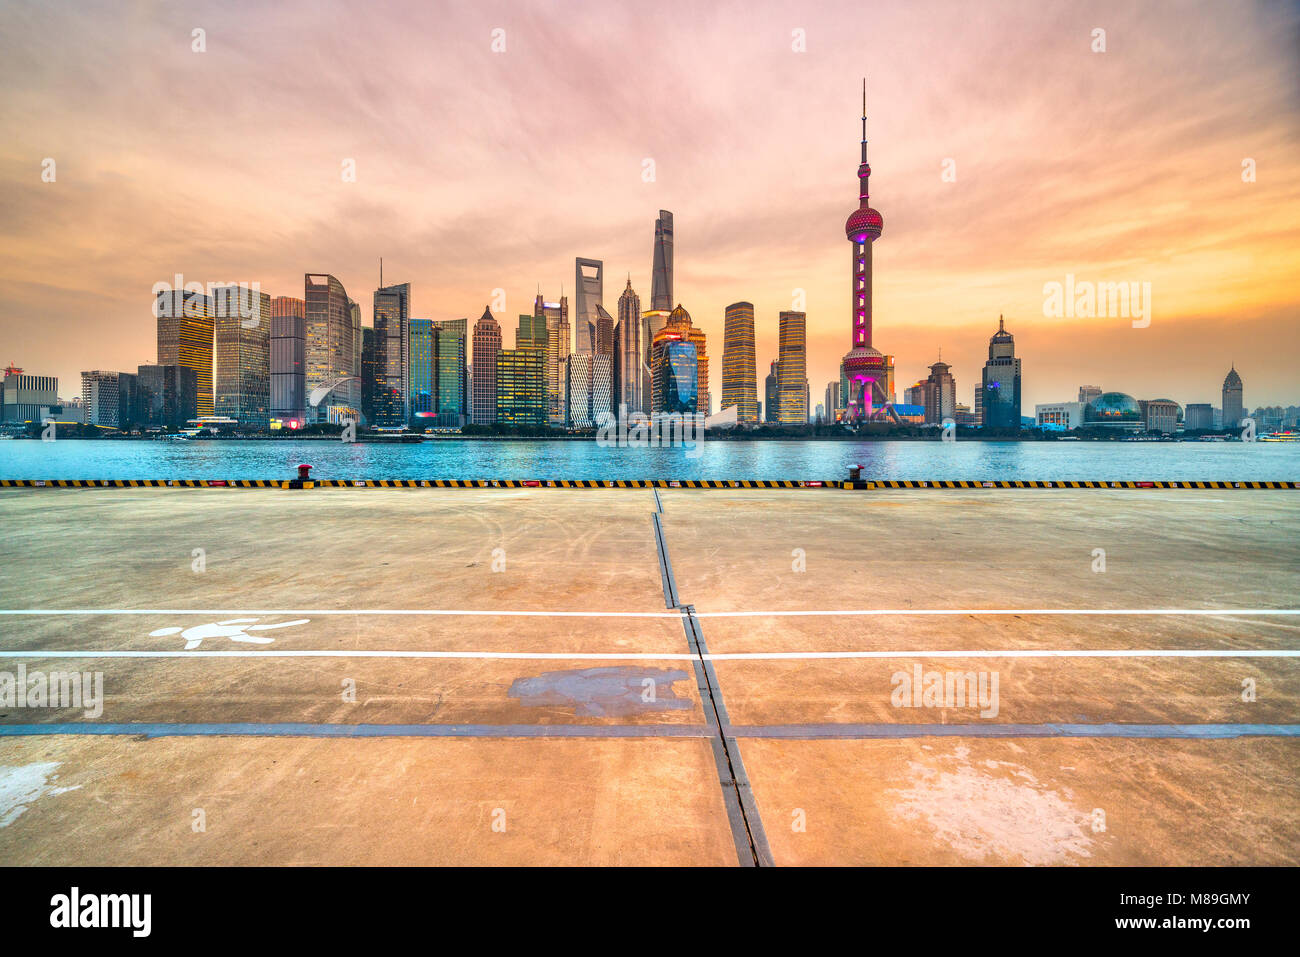 Shanghai city skyline, view of the skyscrapers of Pudong and huangpu River. China. Stock Photo